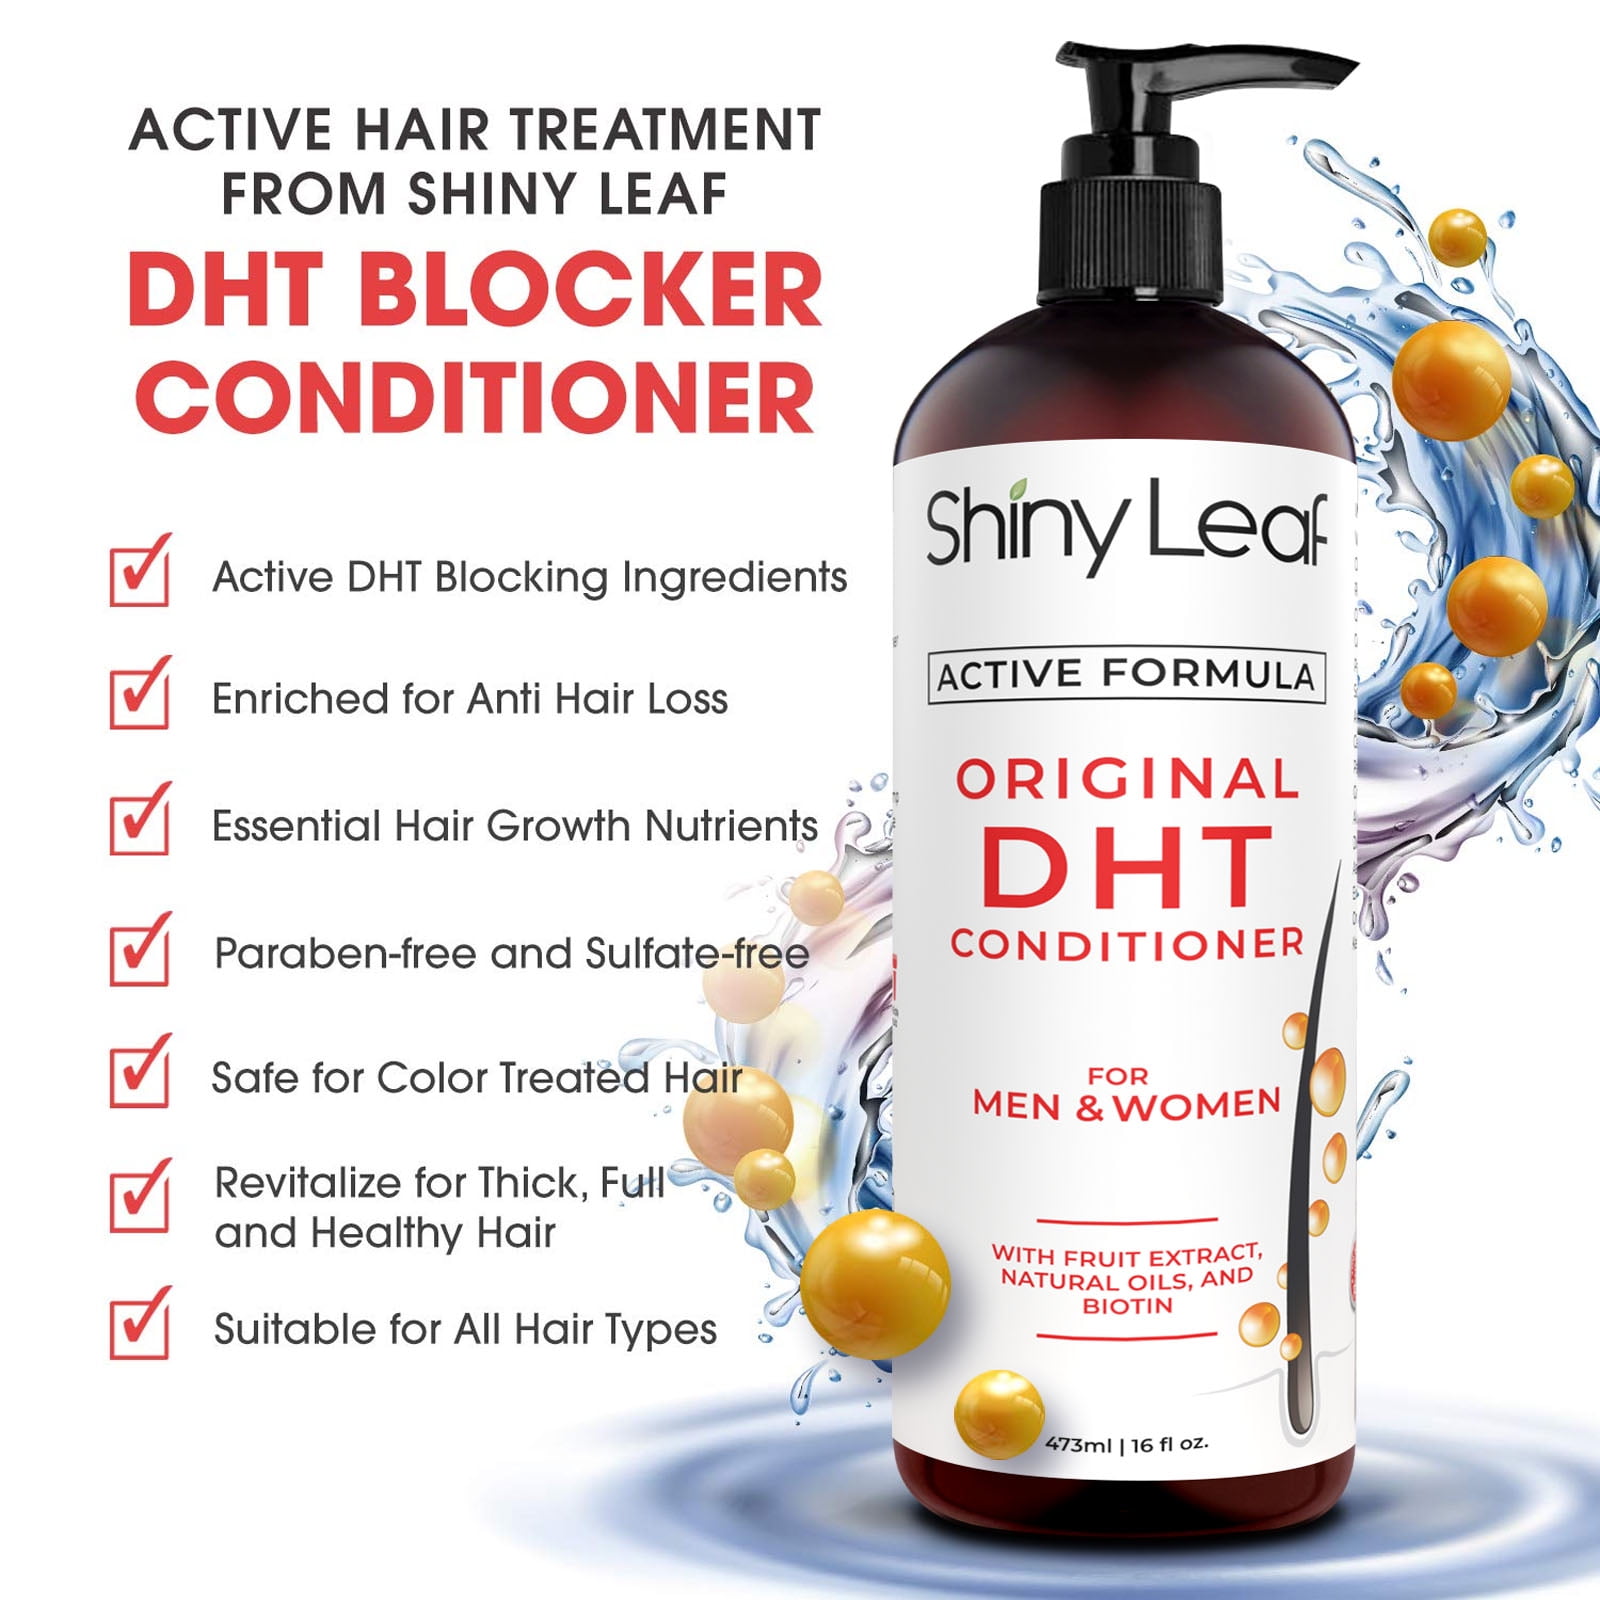 Shiny Leaf DHT Hair Loss Prevention Shampoo and with enHAIRgy DHT Blocker Hair